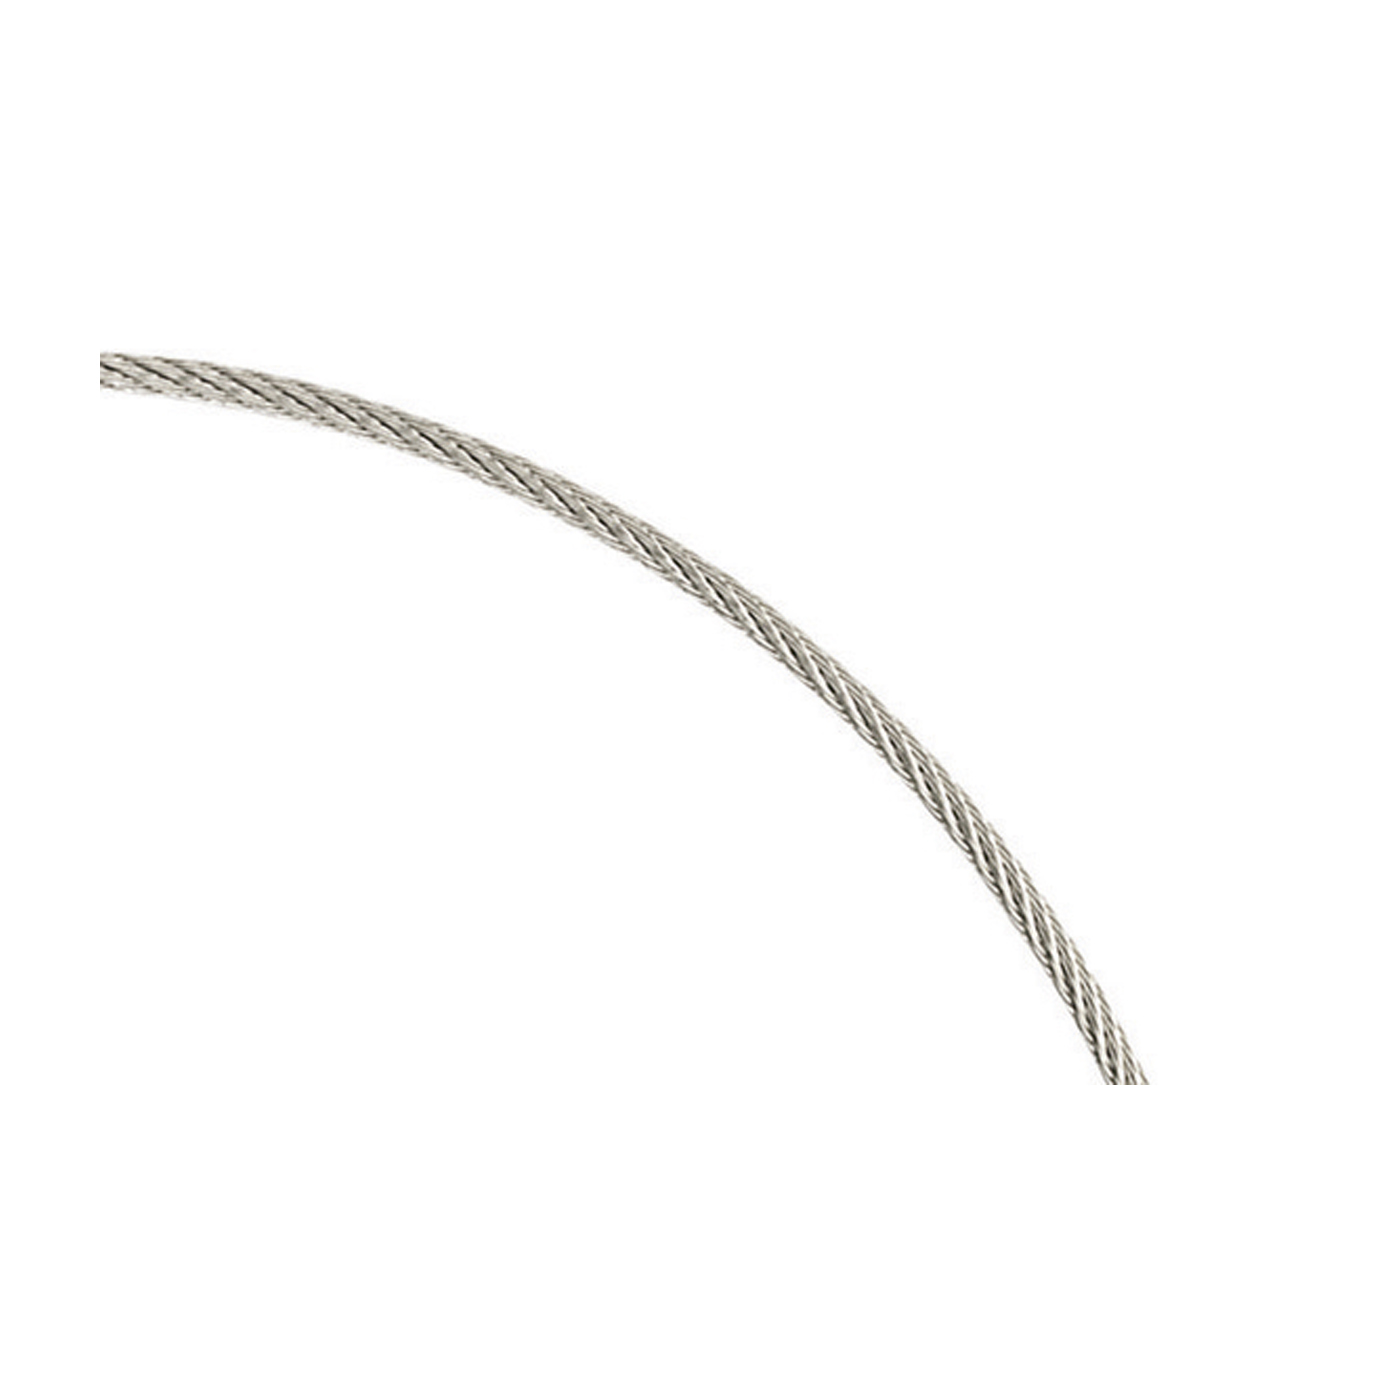 Steel Cable Neck Wire, ø 2.00 mm, 45 cm - 1 piece